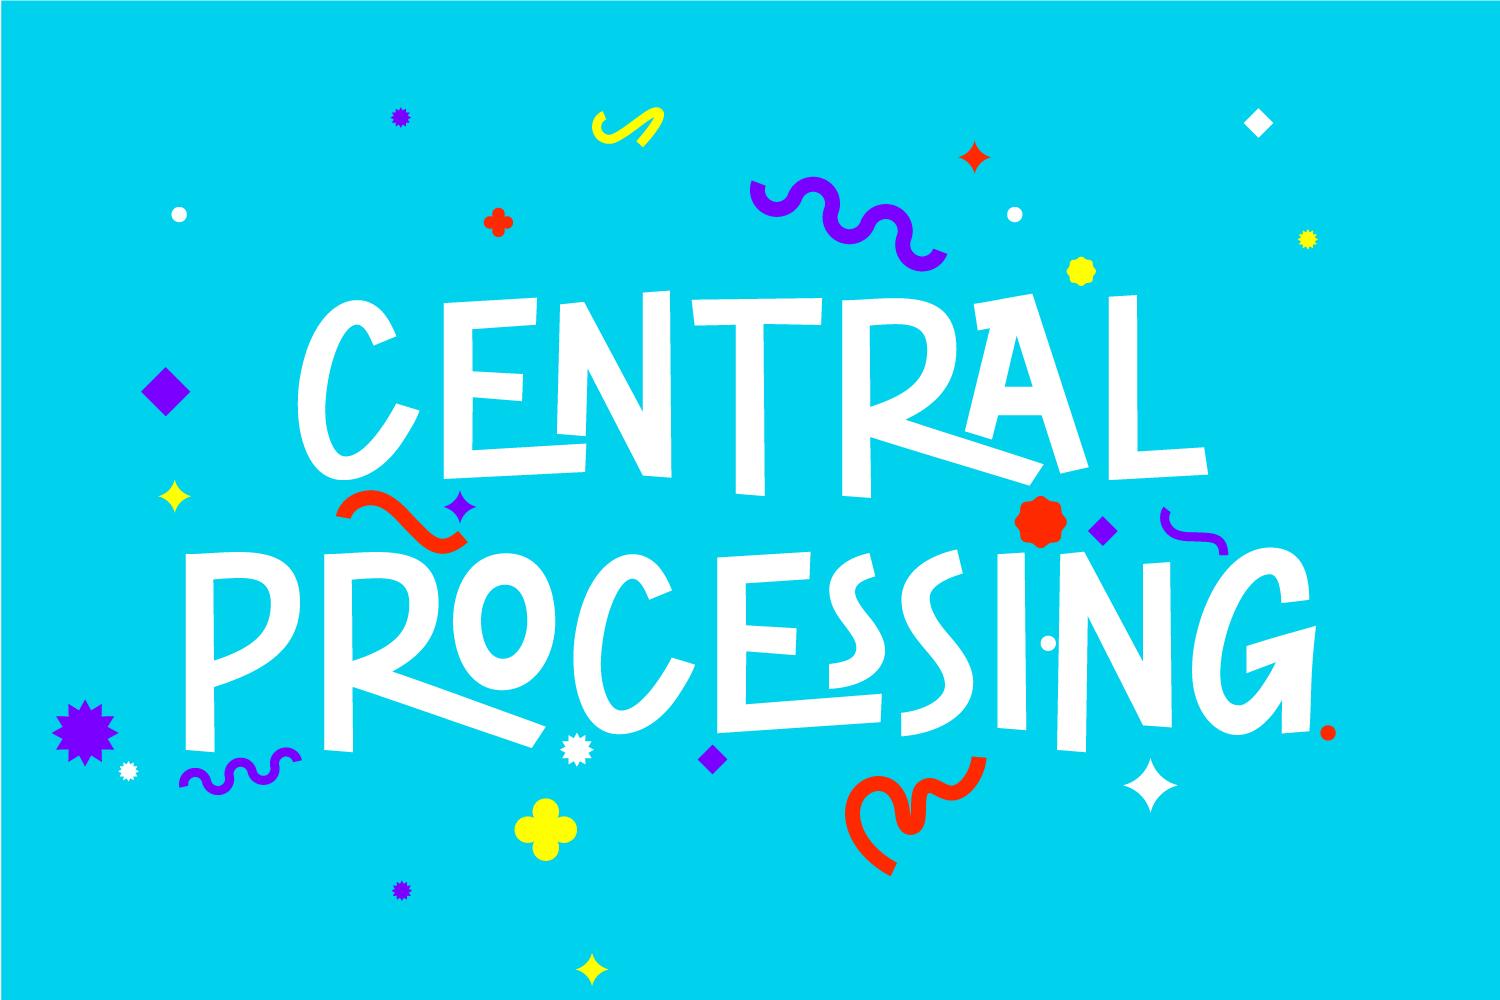 Central Processing Font